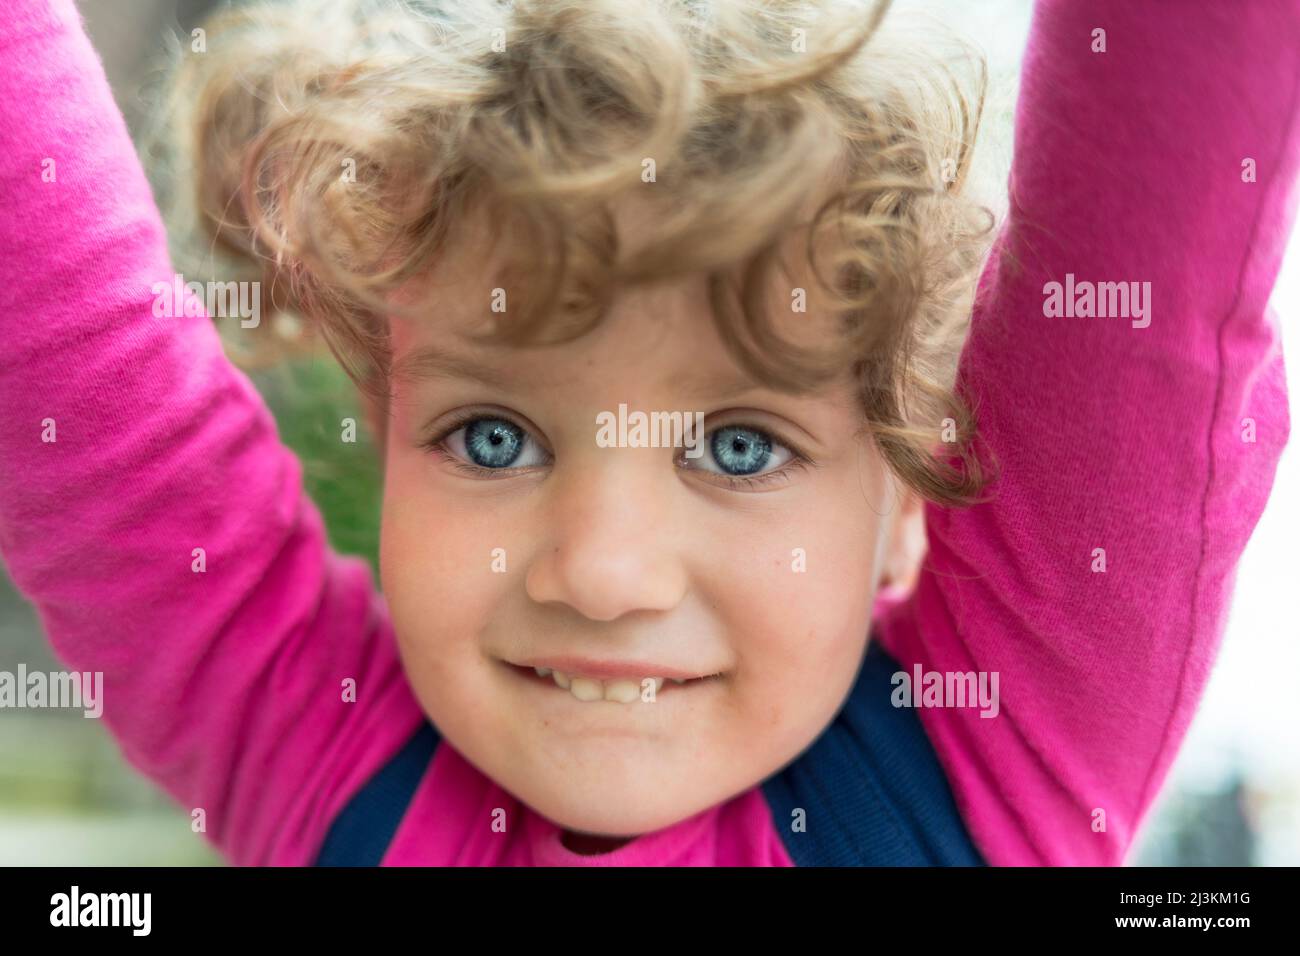 Portrait of a young girl with blond curly hair and big blue eyes; Toronto, Ontario, Canada Stock Photo